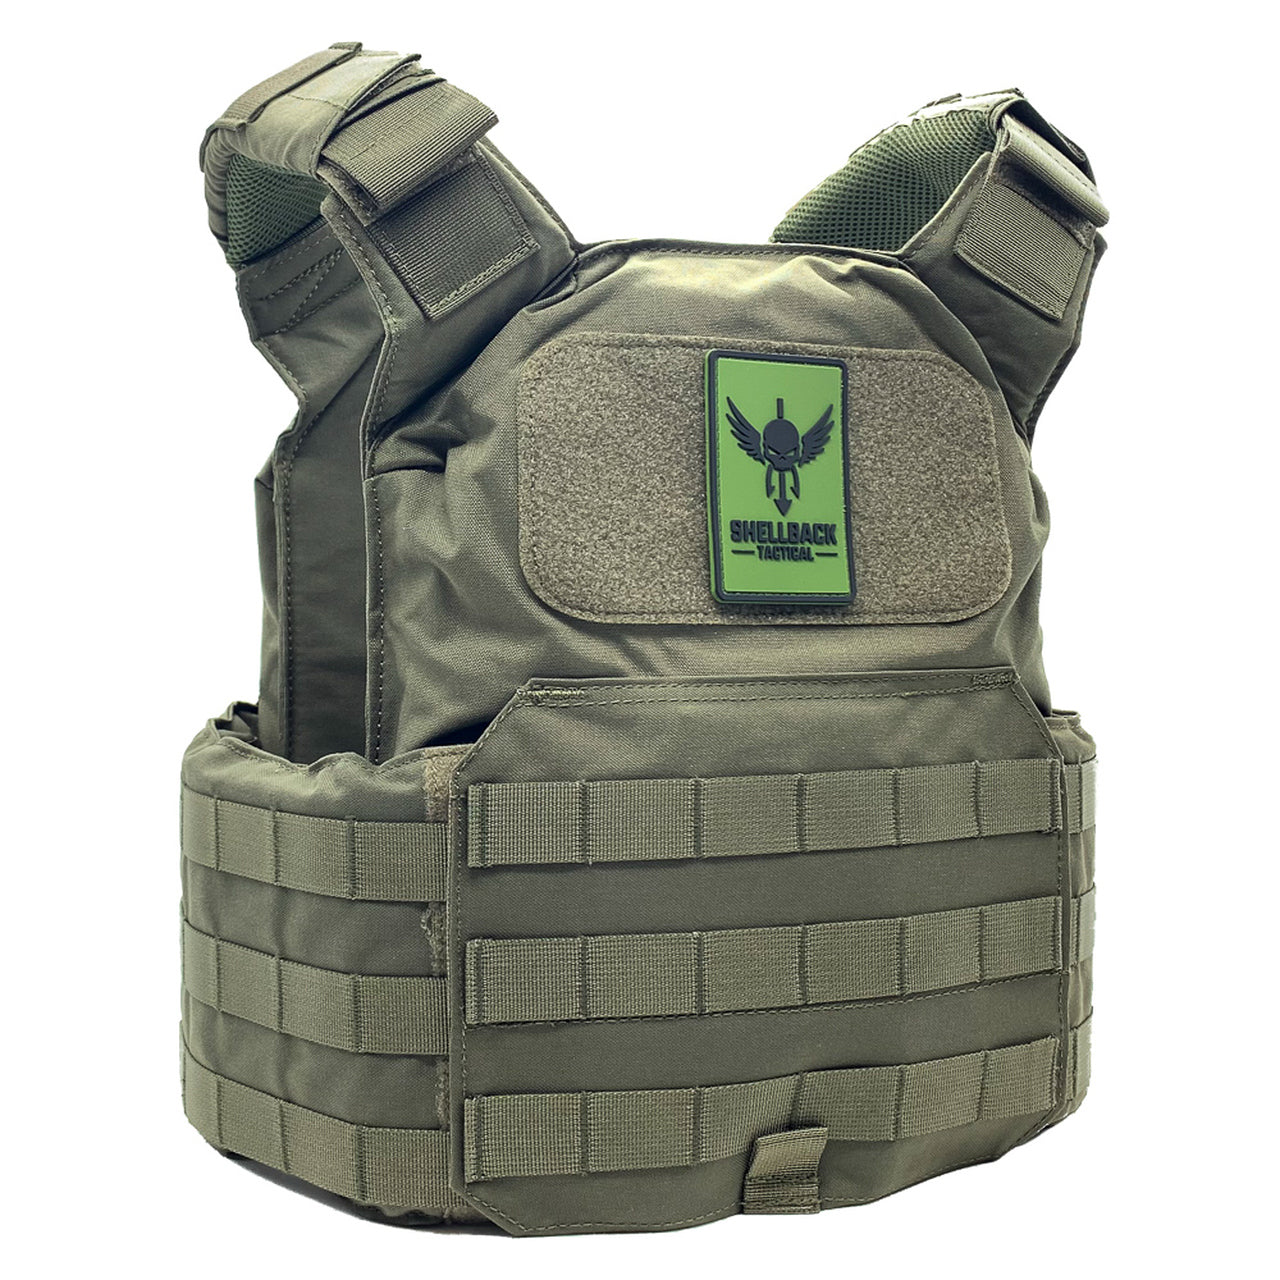 A Shellback Tactical Shield Plate Carrier on a white background.